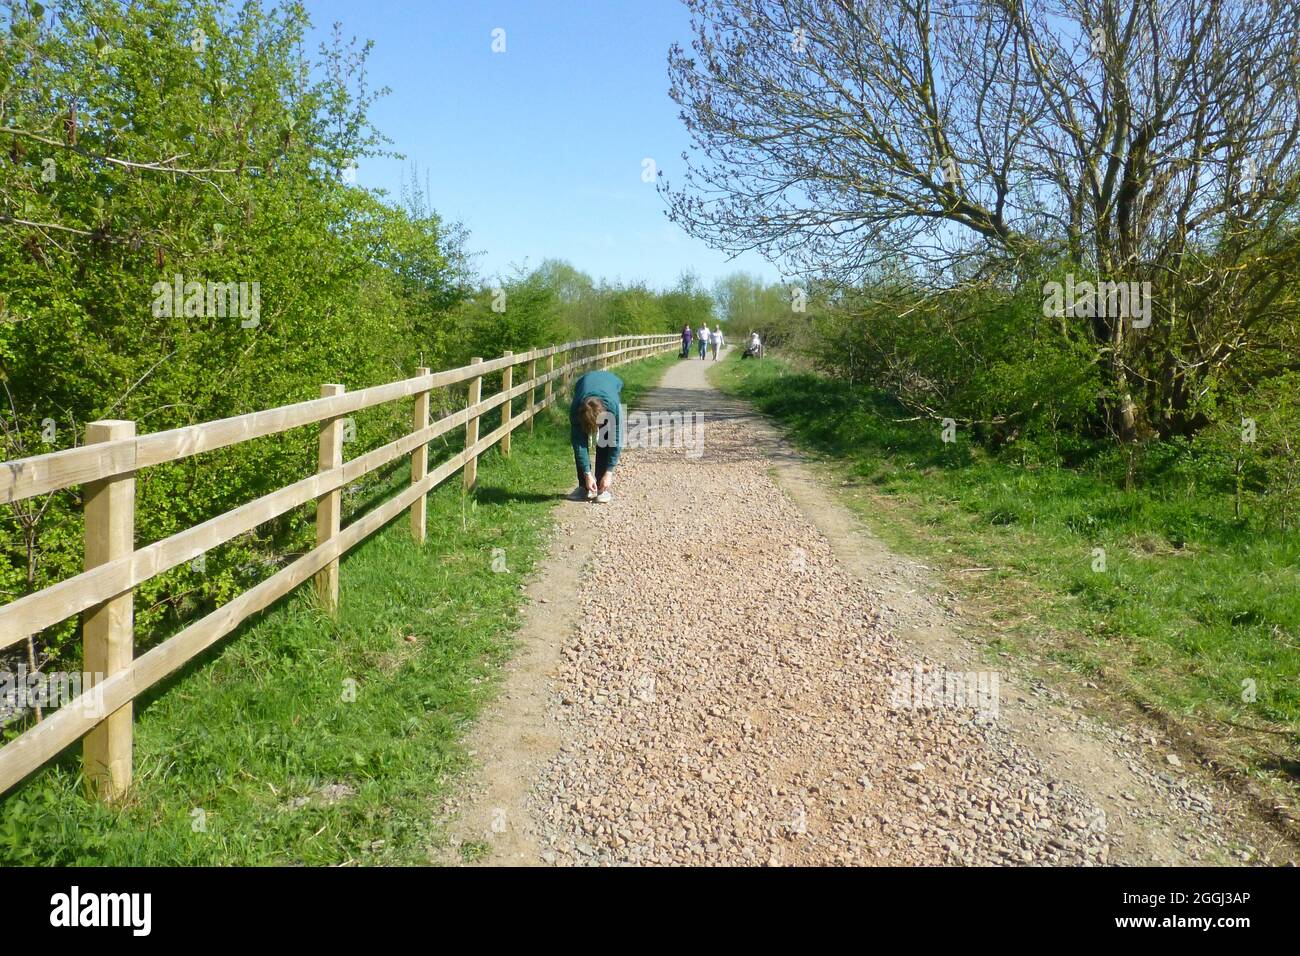 Summer Leys Northamptonshire walker gavel grit path pathway track fence fencing tree trees line old train track bend walkers outside trees views view Stock Photo